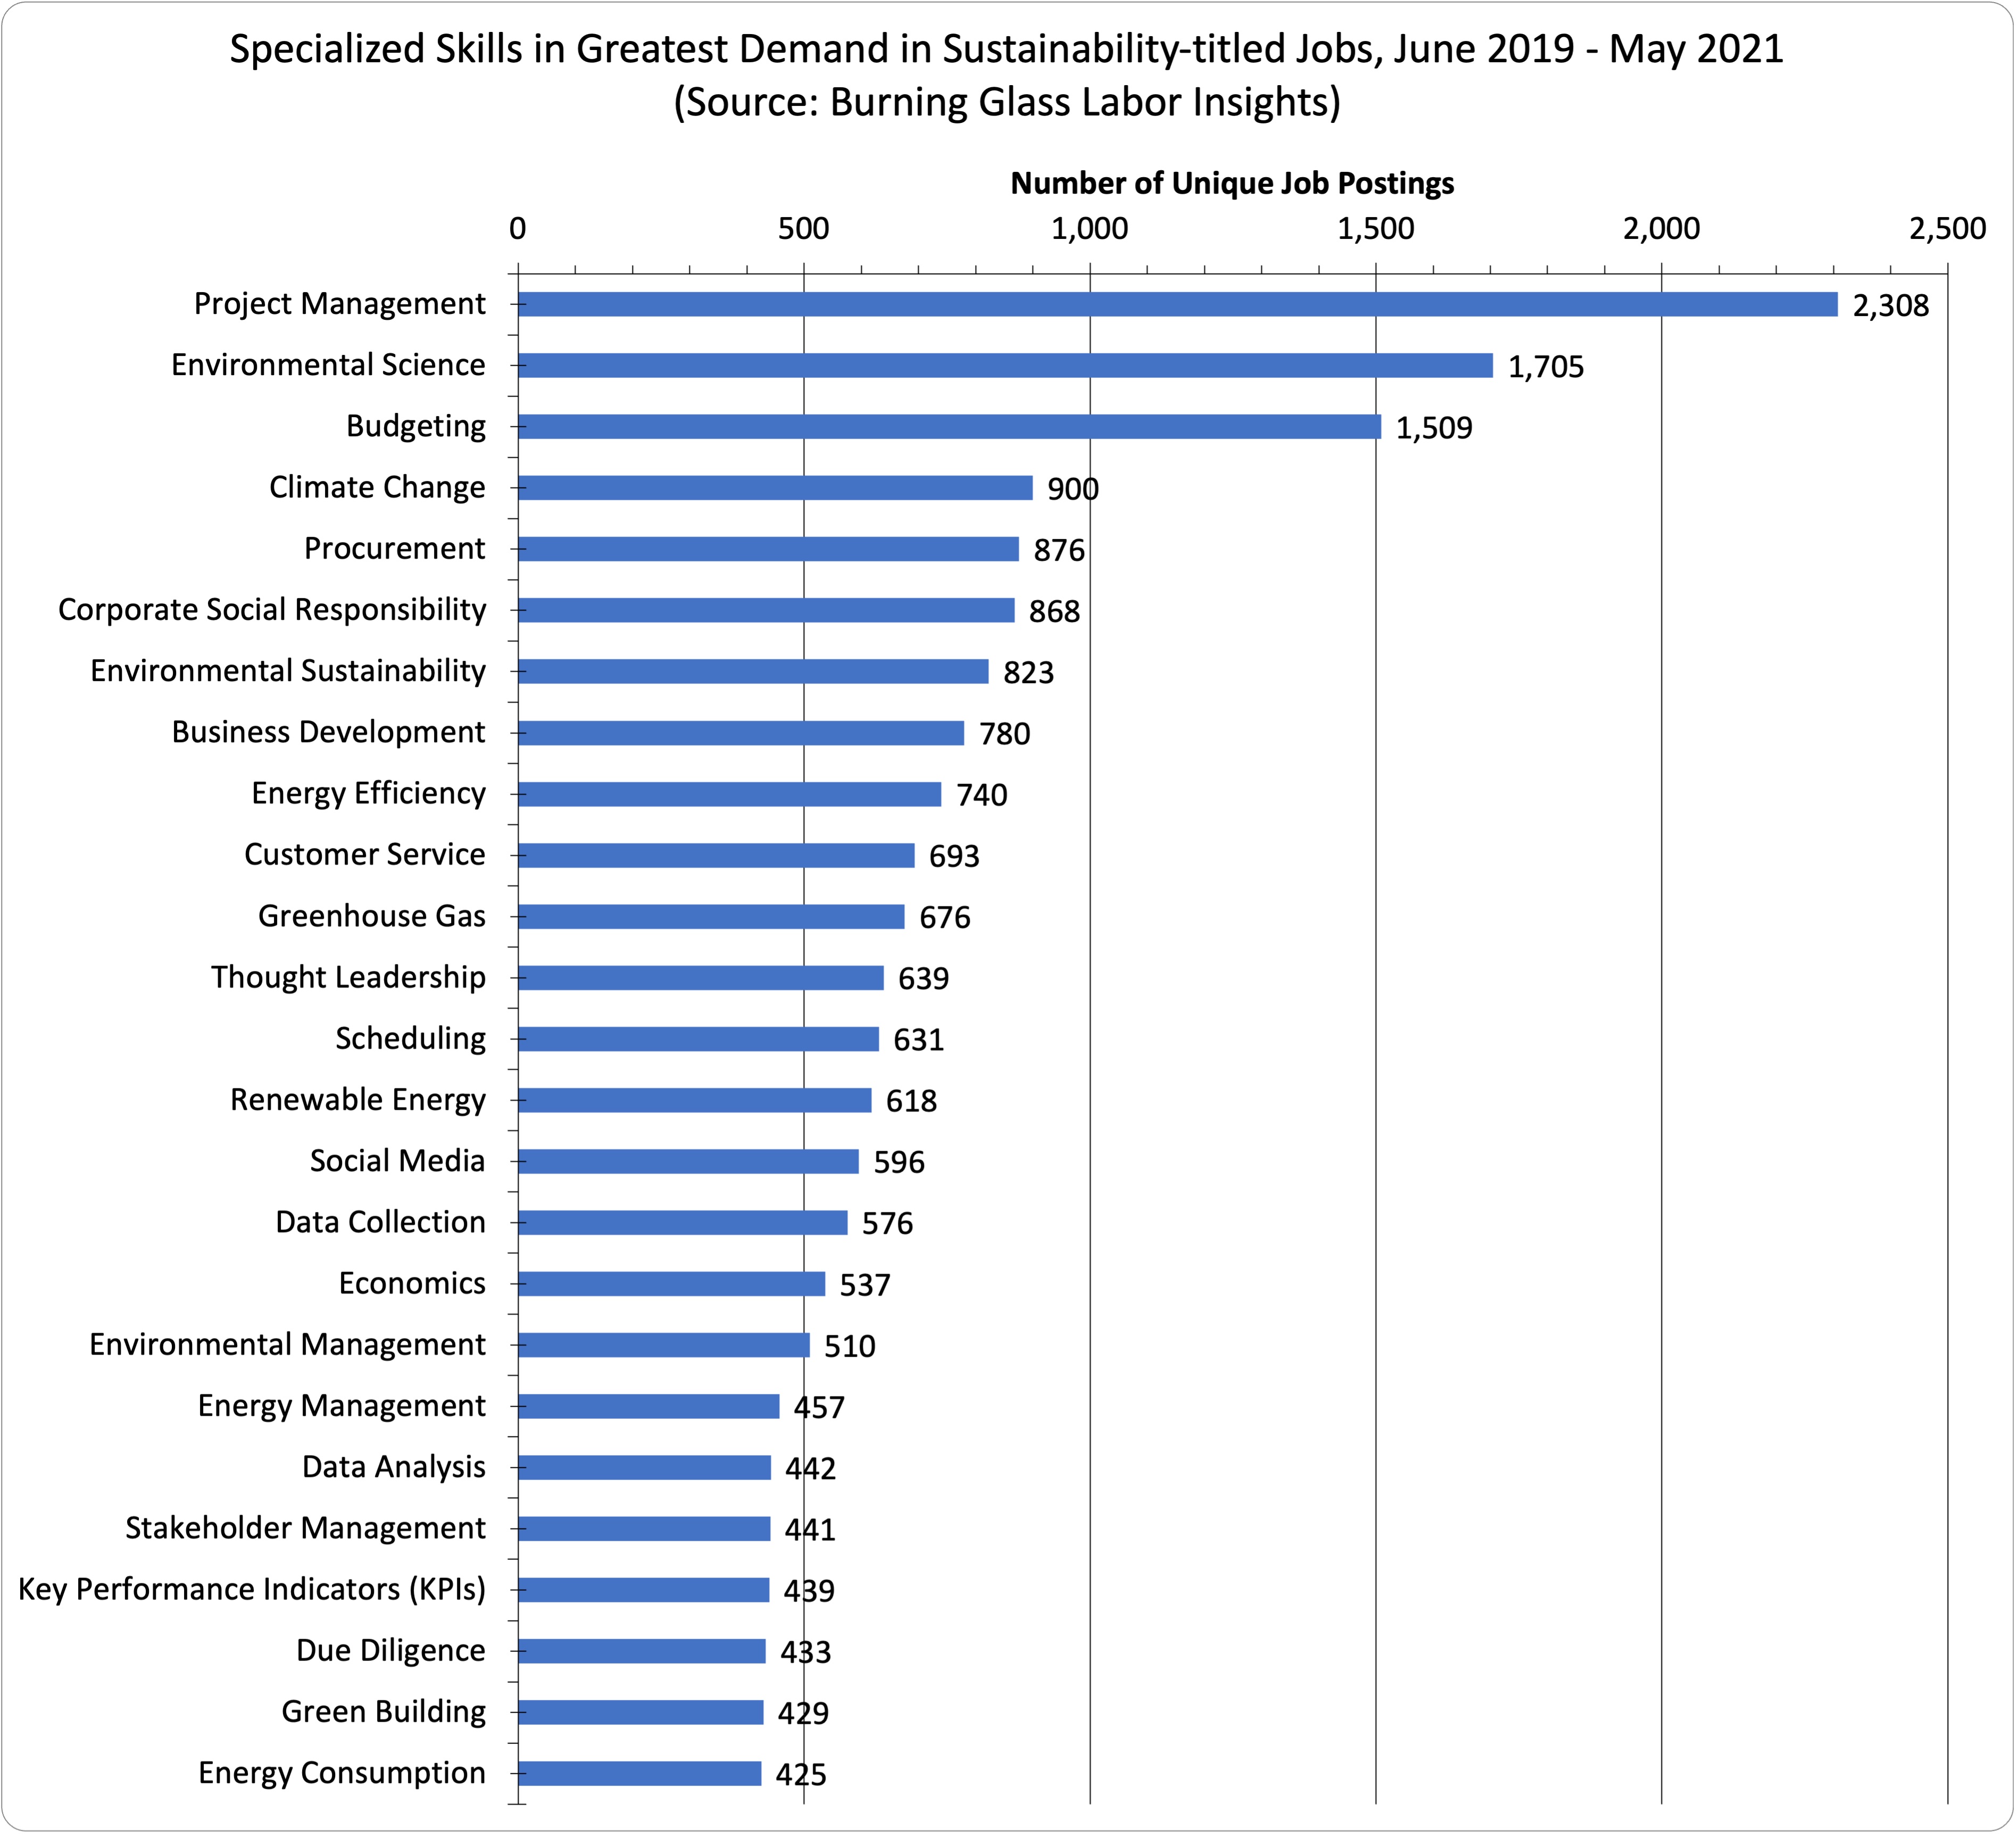 The bar chart below shows the top 20 specialized skills for sustainability-titled jobs in job postings made from June 2019 through May 2021